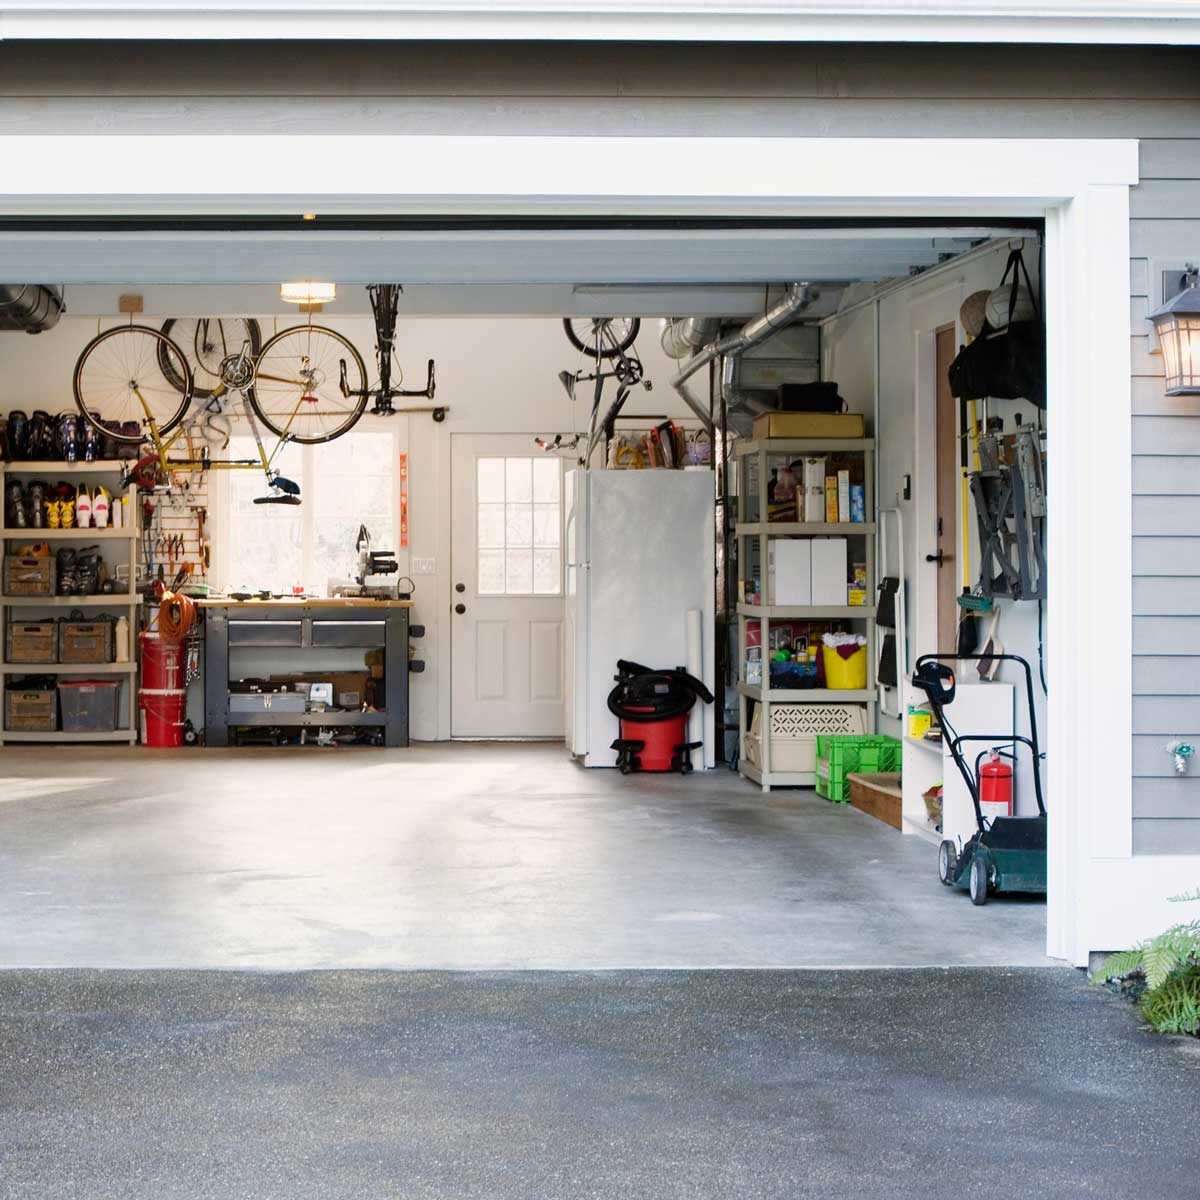 7 Ways to Protect Your Garage from Burglars